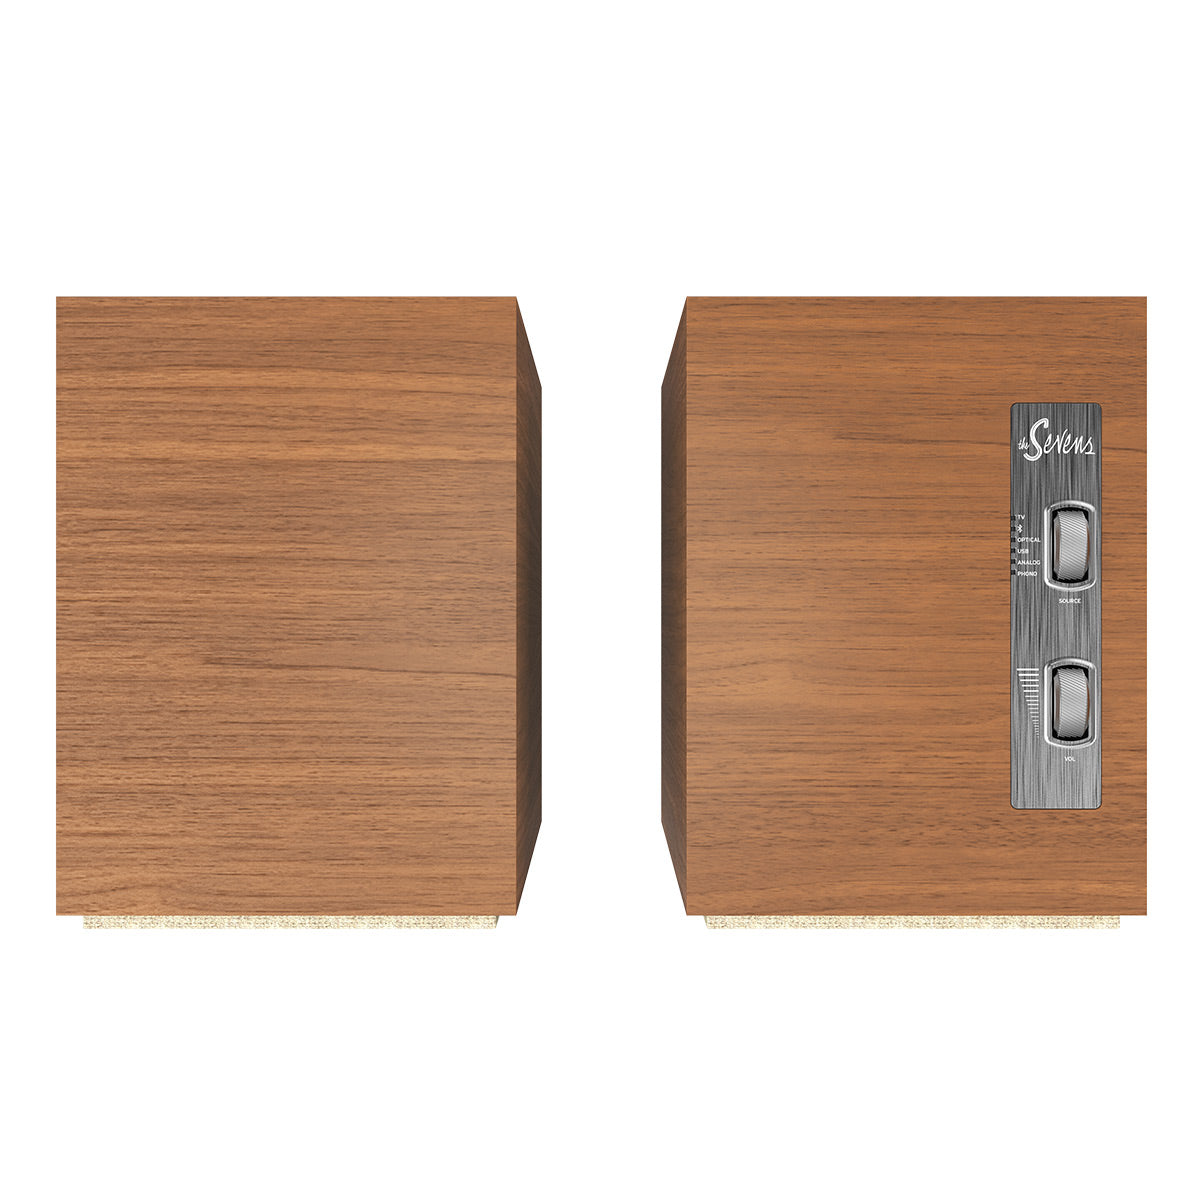 Klipsch The Sevens Heritage Series Wireless Powered Monitors with 6.5" Woofer - Pair (Walnut)